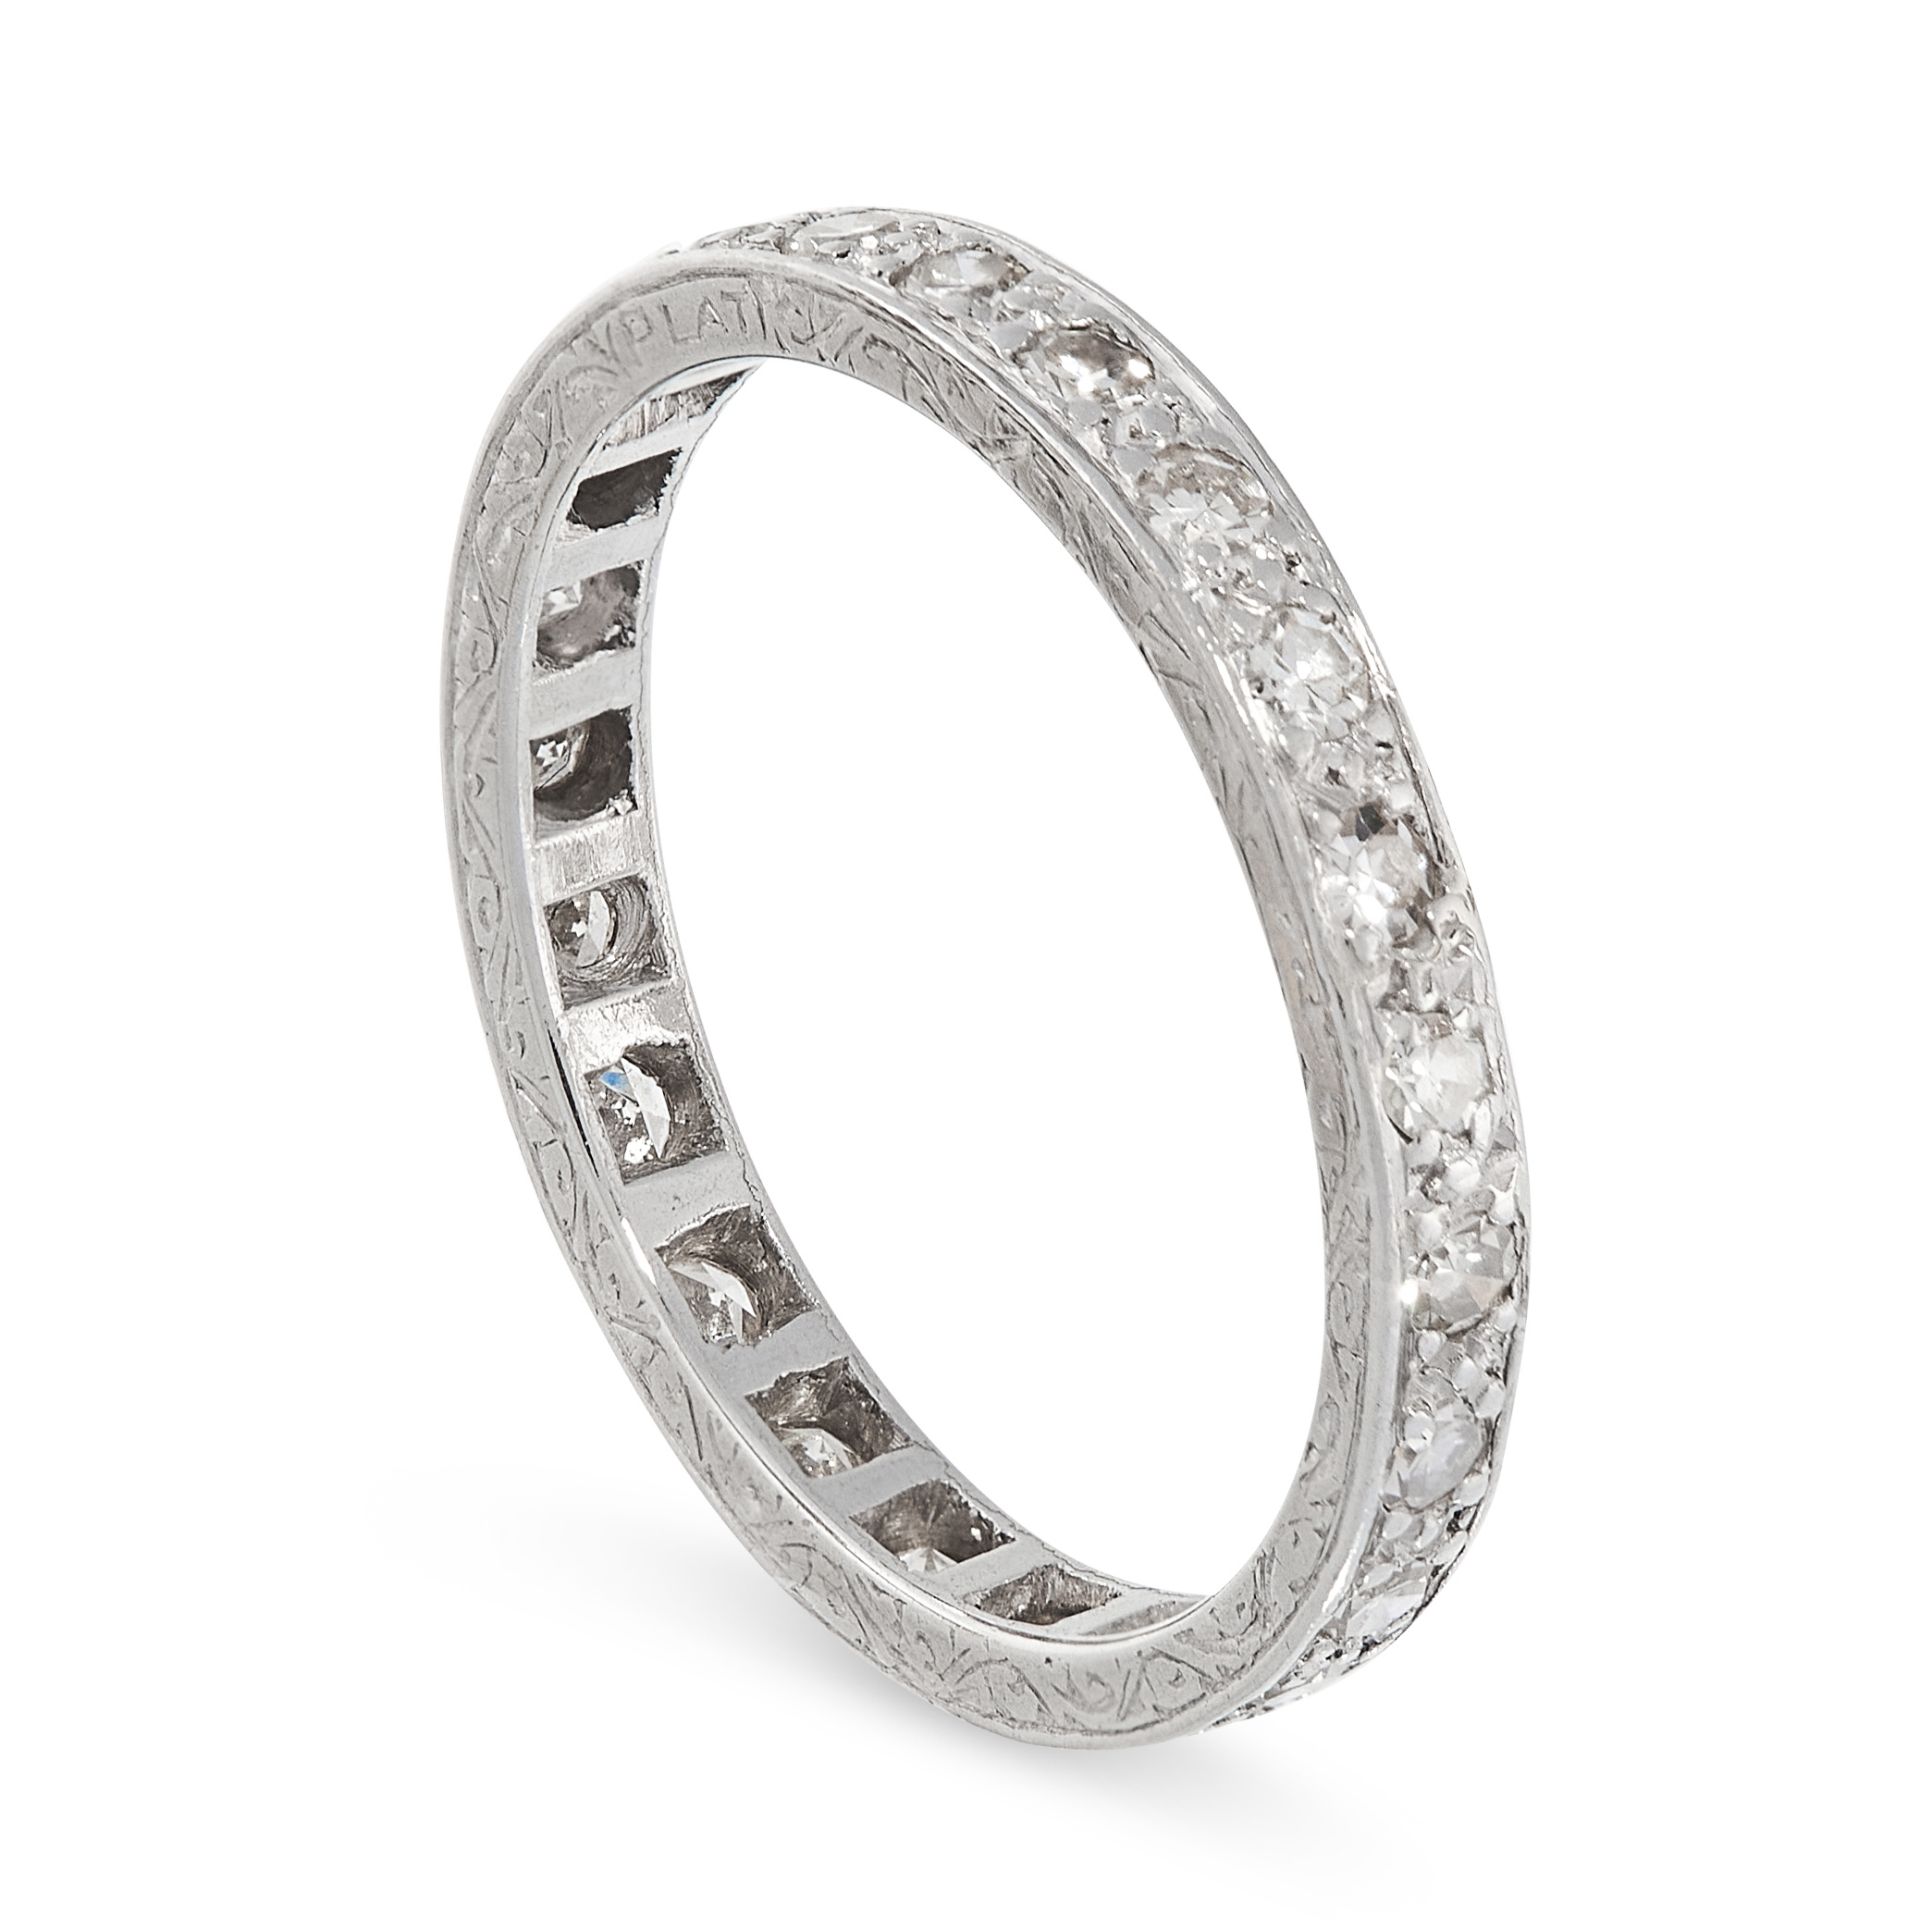 AN ART DECO DIAMOND ETERNITY RING, EARLY 20TH CENTURY in platinum, the band set all around with a - Image 2 of 2